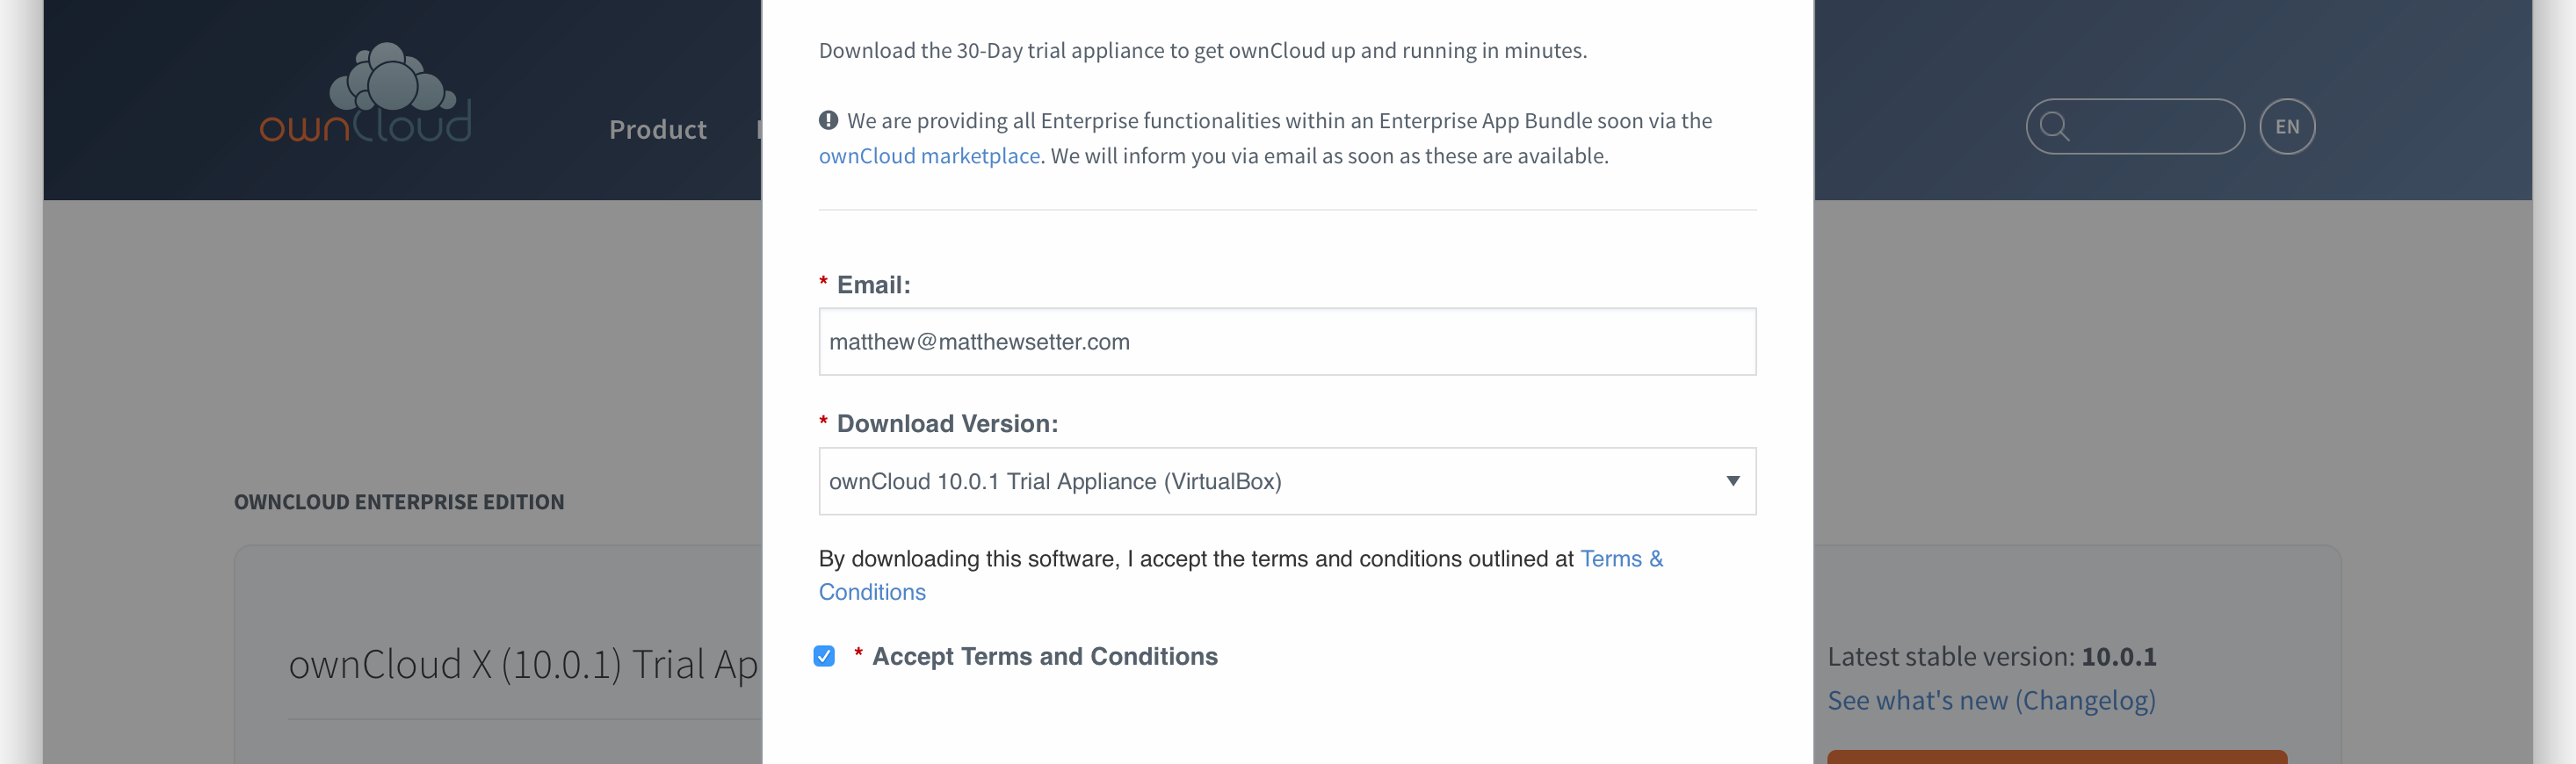 The ownCloud X Trial Appliance download form.